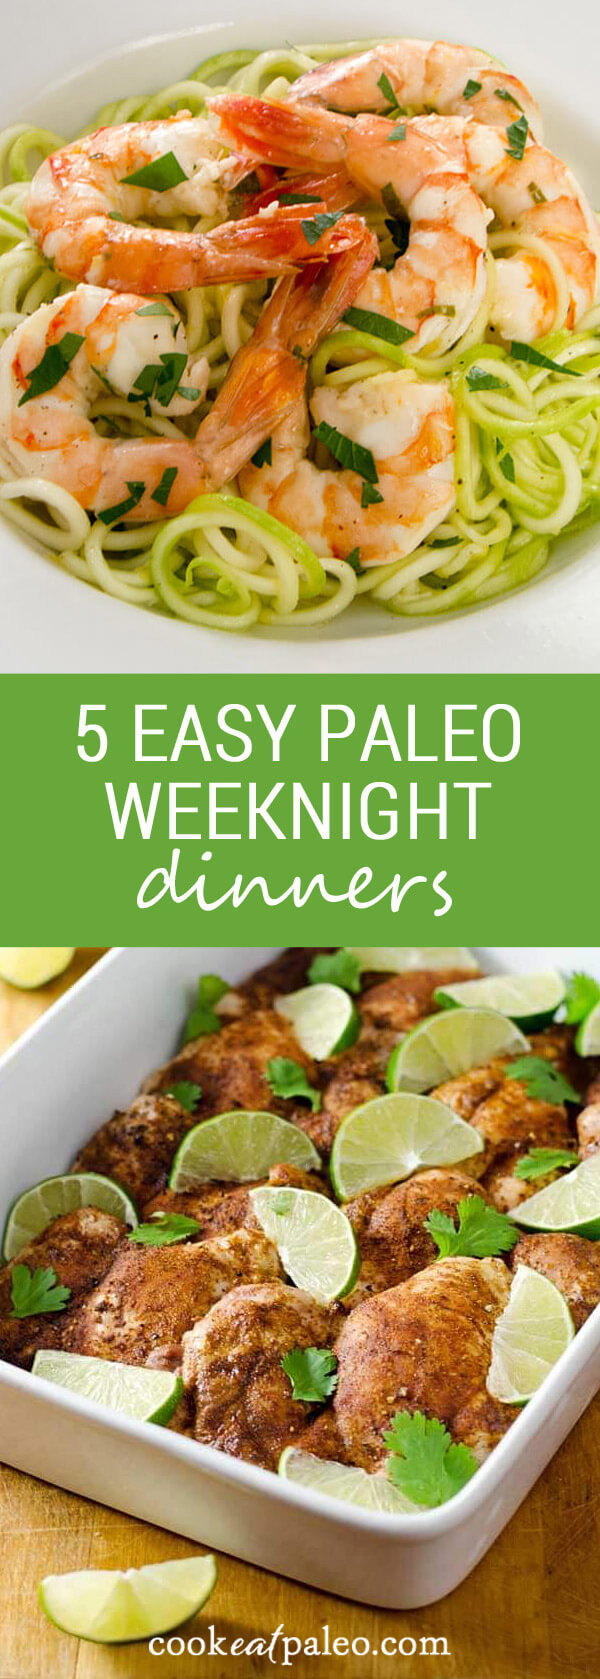 Weeknight Dinners Ideas
 5 Easy Paleo Dinner Recipes for Busy Weeknights